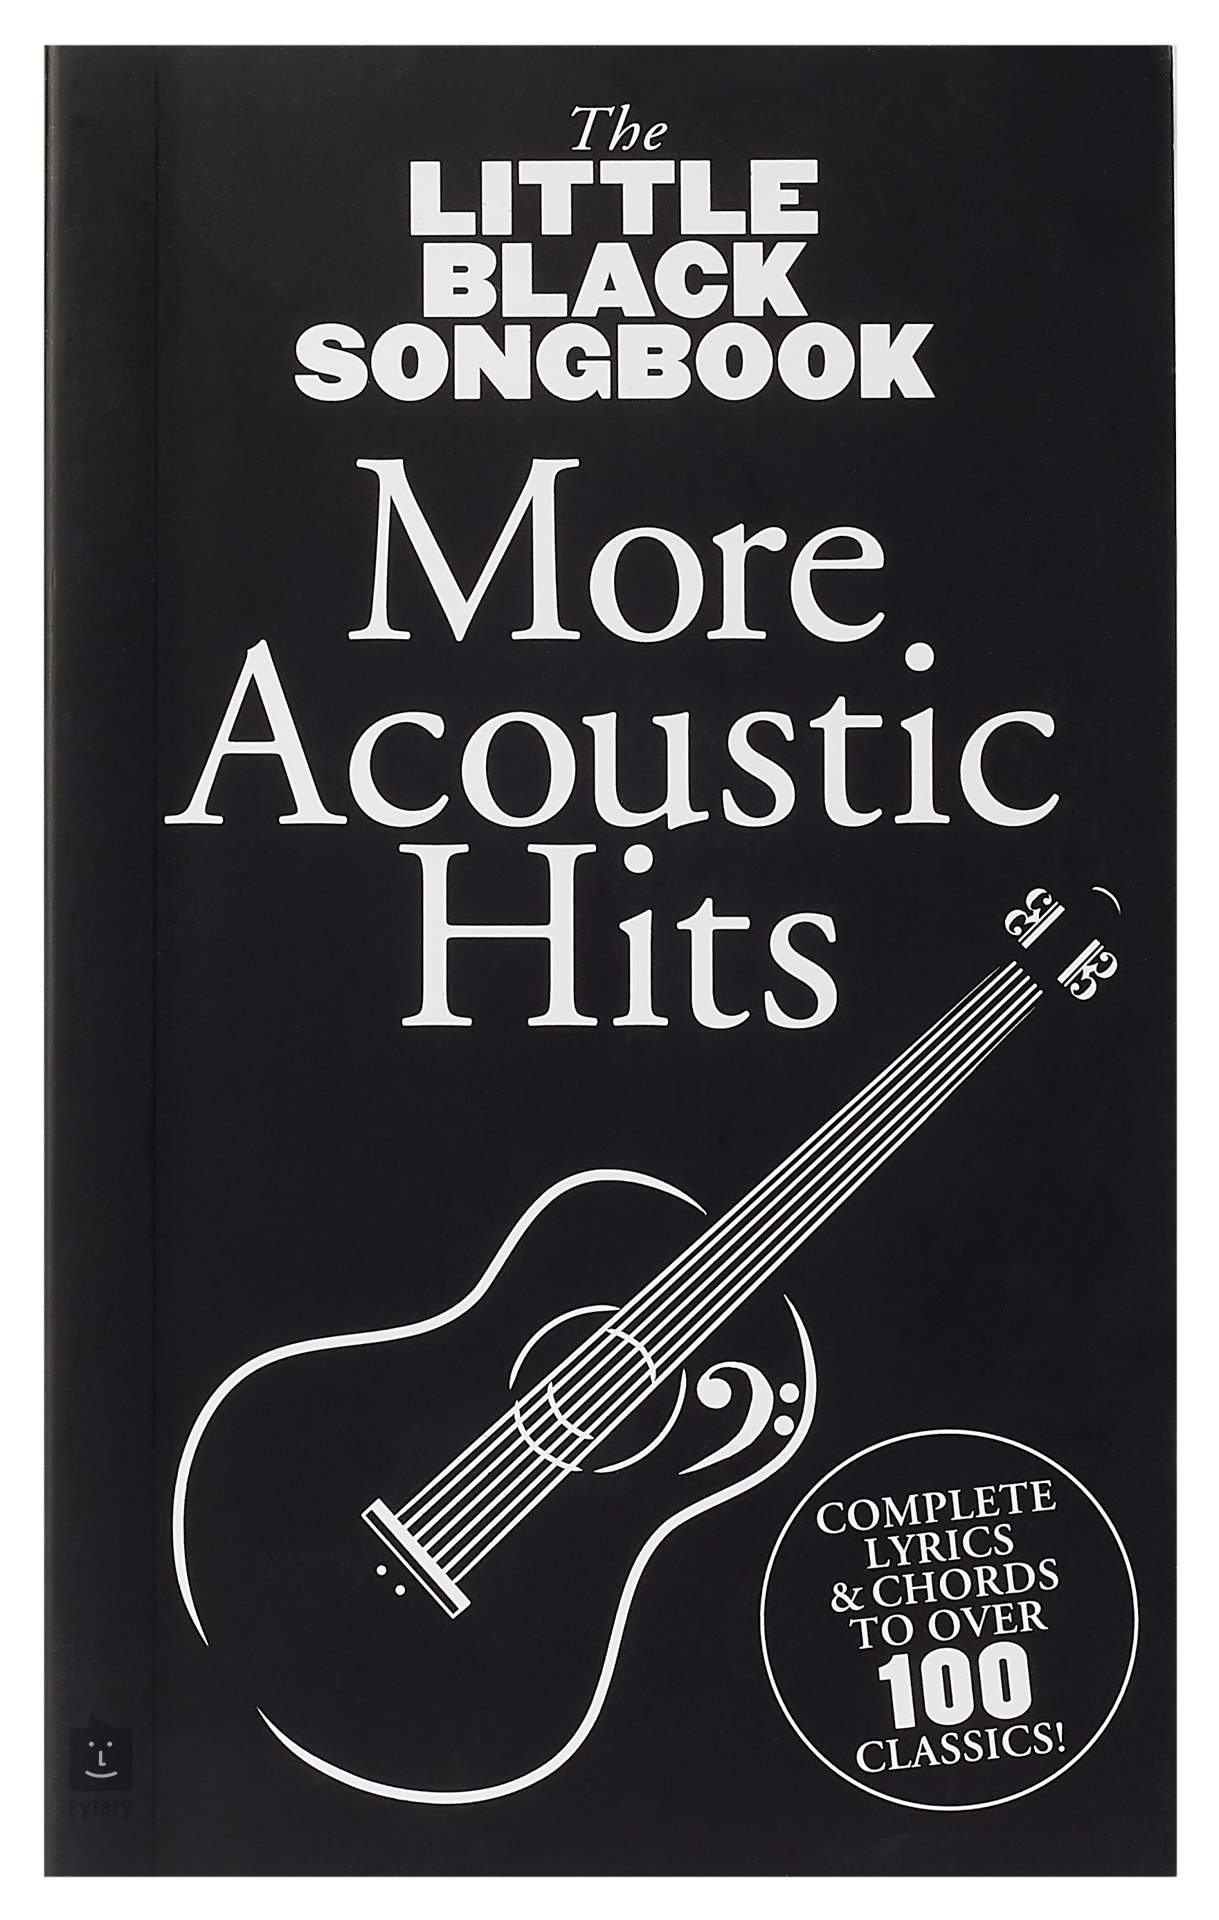 The Little Black Songbook Acoustic Hit Songs by Various 0711942331